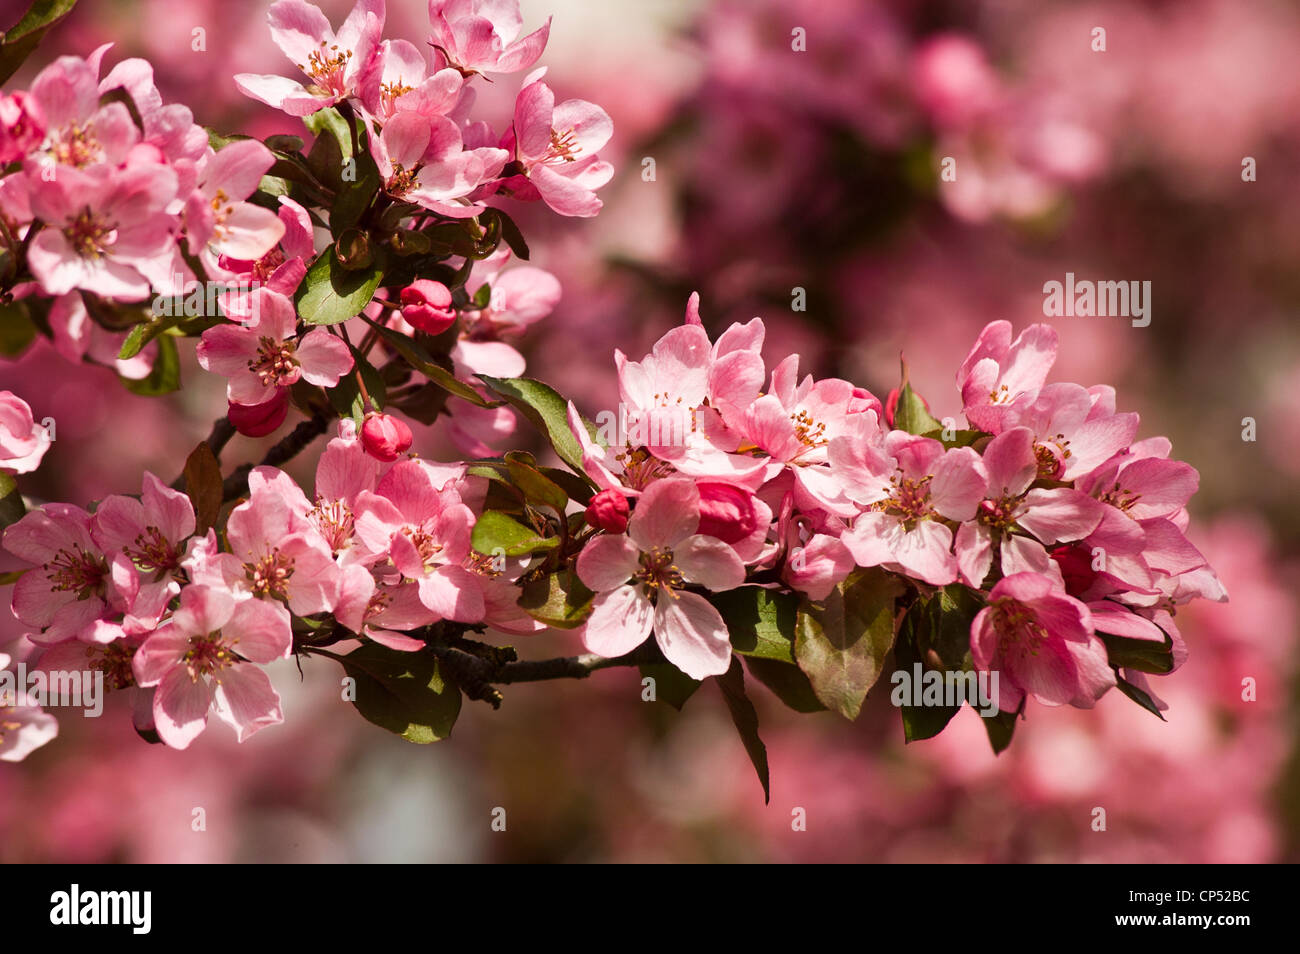 Pink red flower buds of apple malus Stock Photo